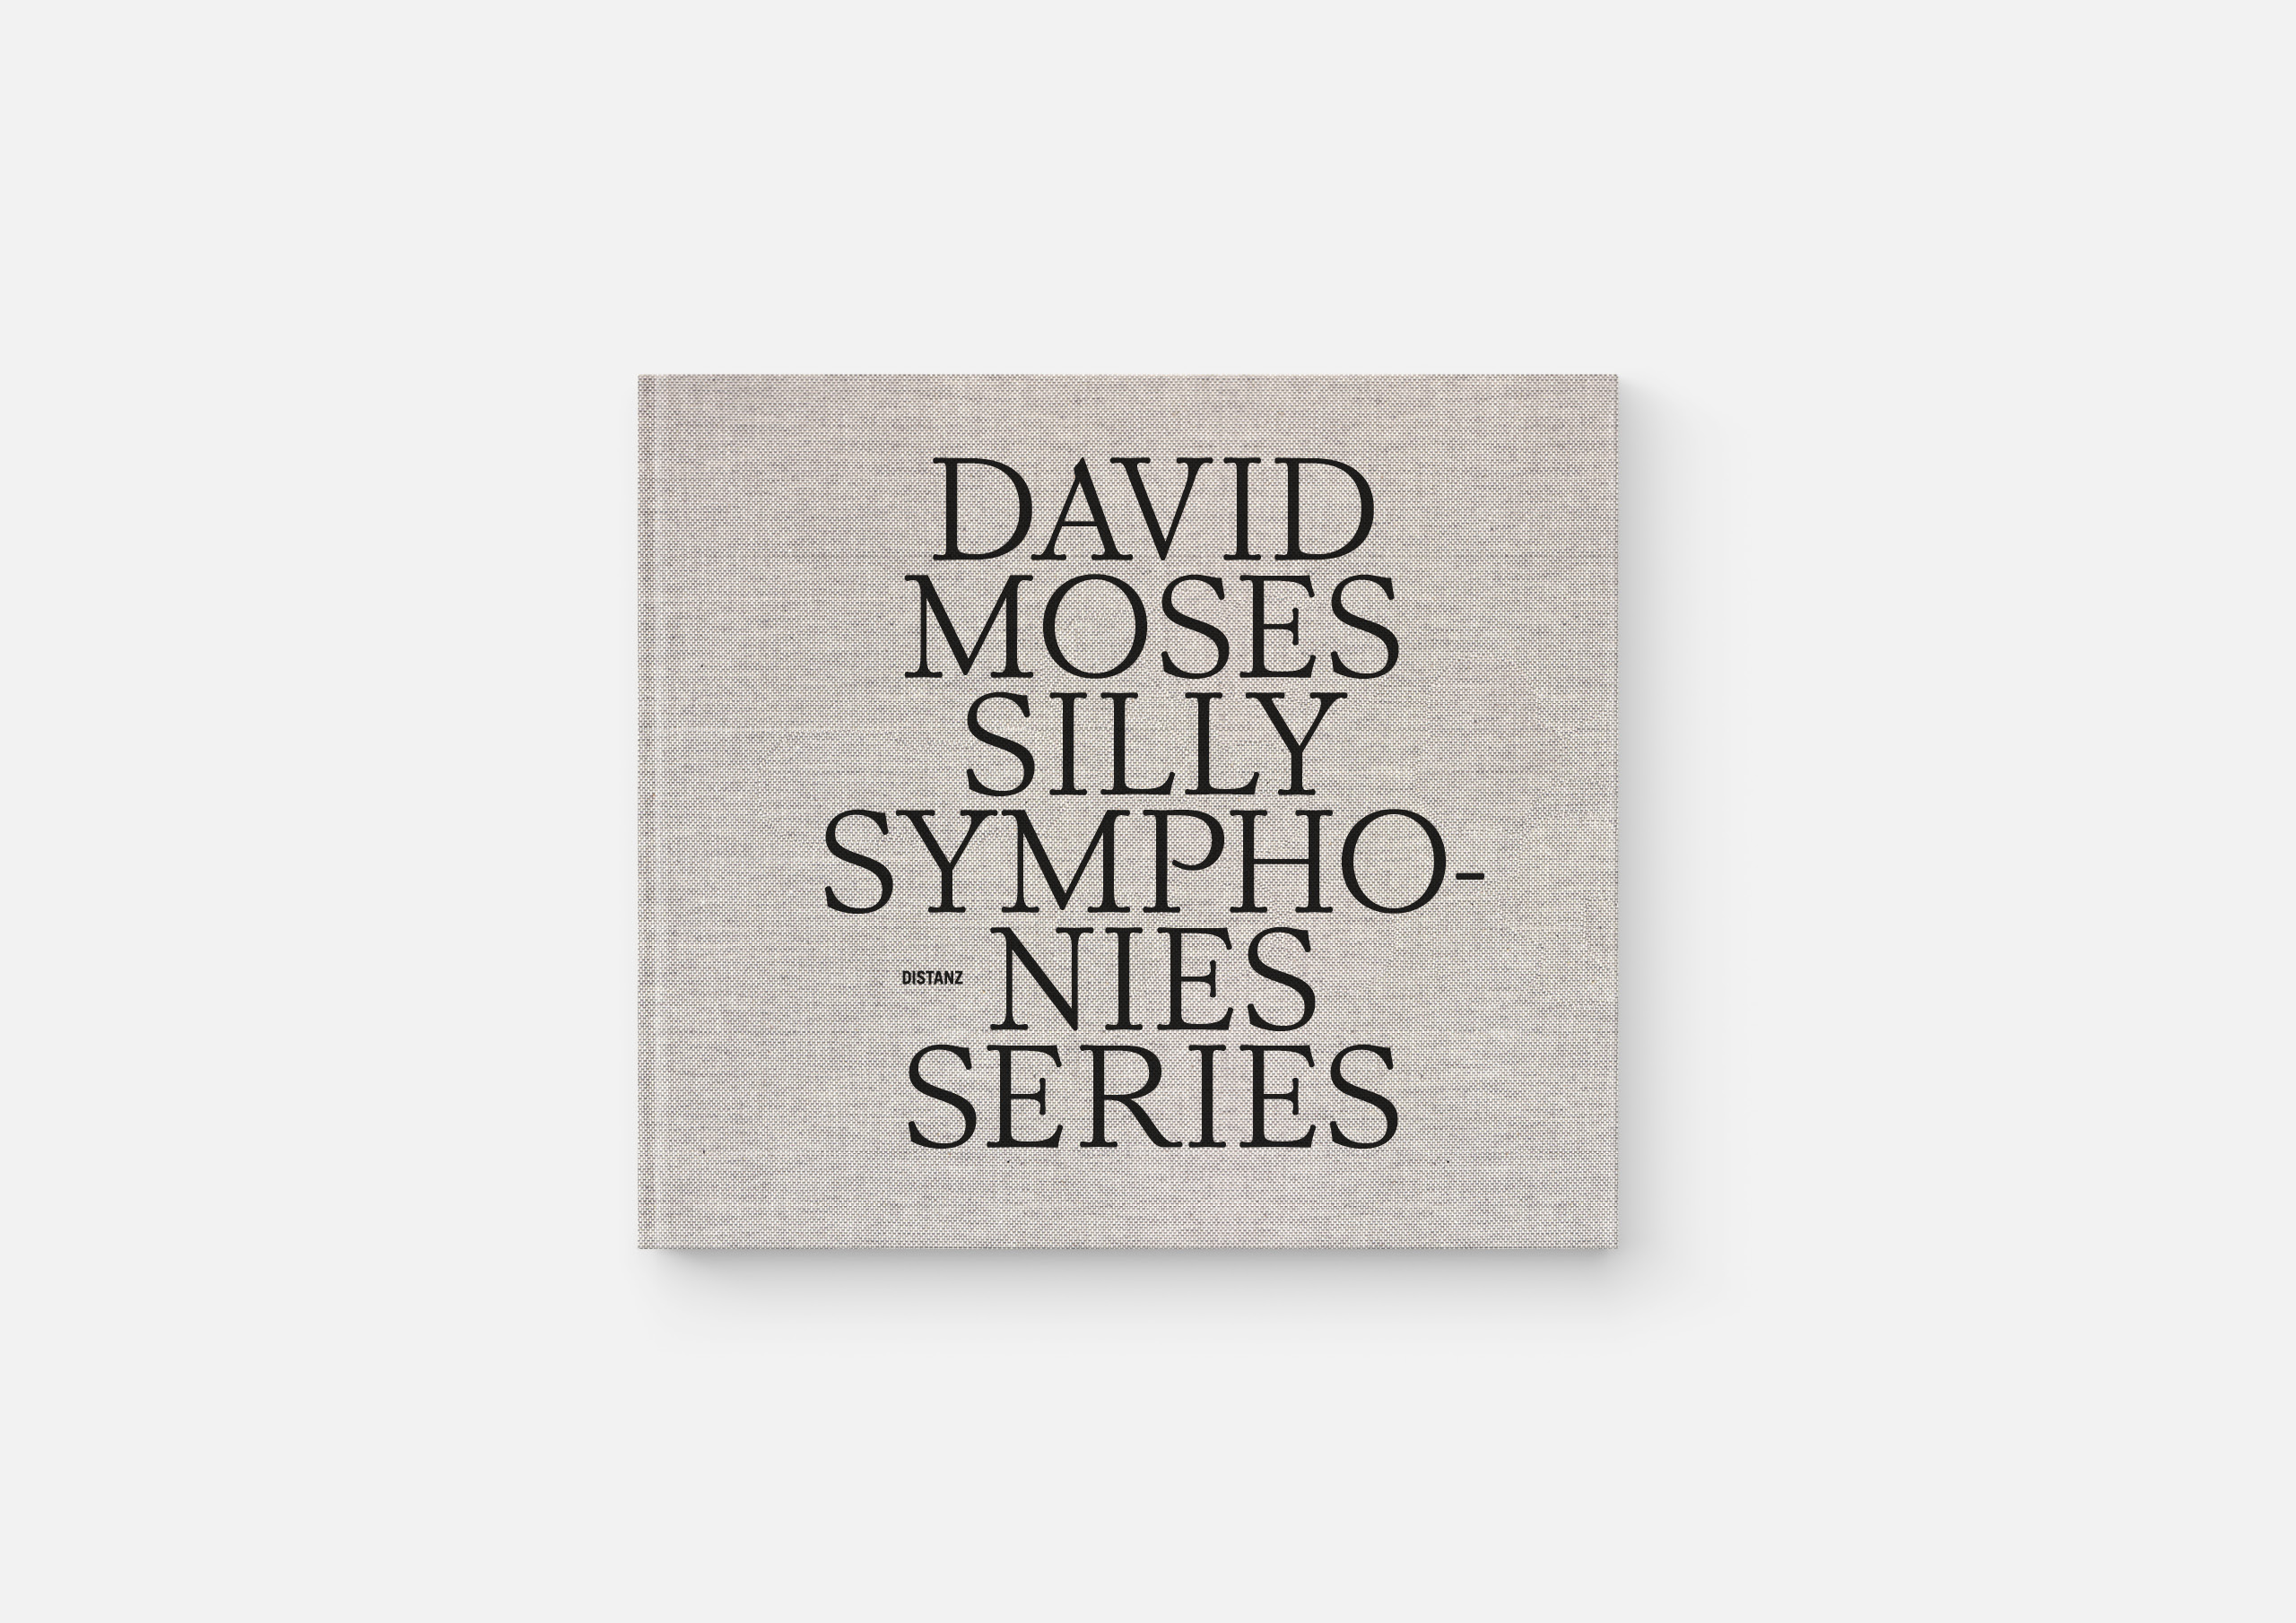 https://neuegestaltung.de/media/pages/clients/david-moses/48a578412e-1710175689/dm_silly_01_cover.jpg